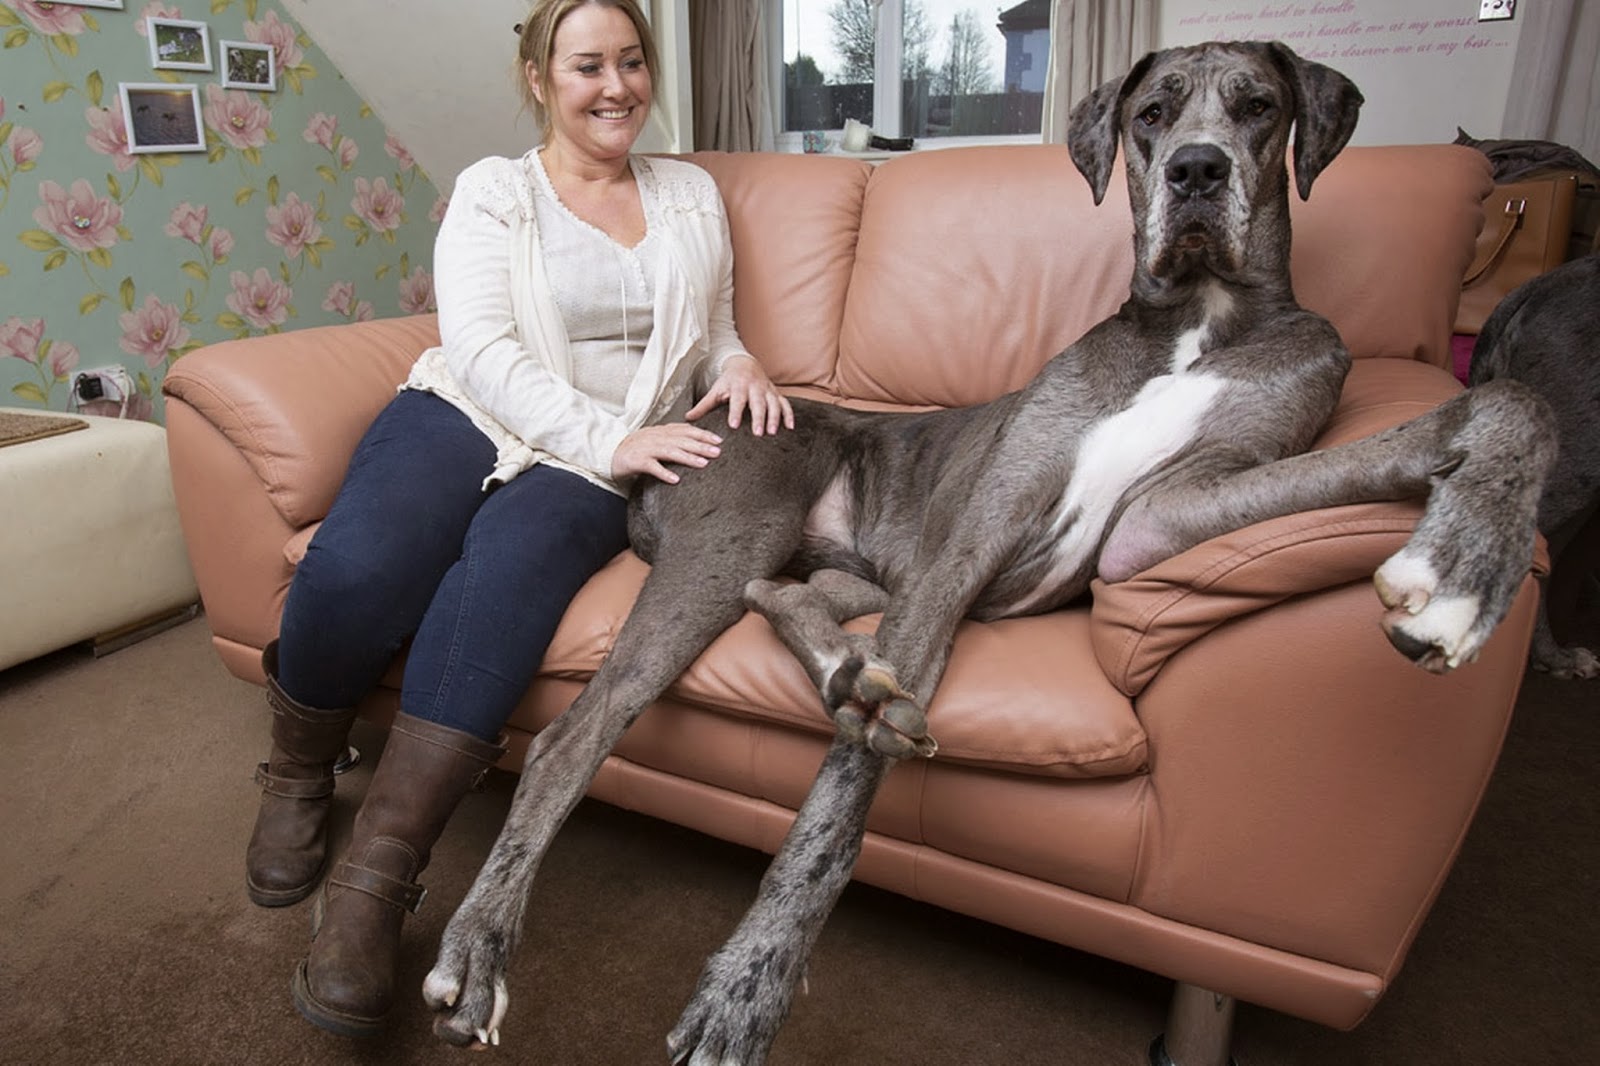 Britain's biggest dog, Freddy the Great Dane, is over 7ft tall and sti...